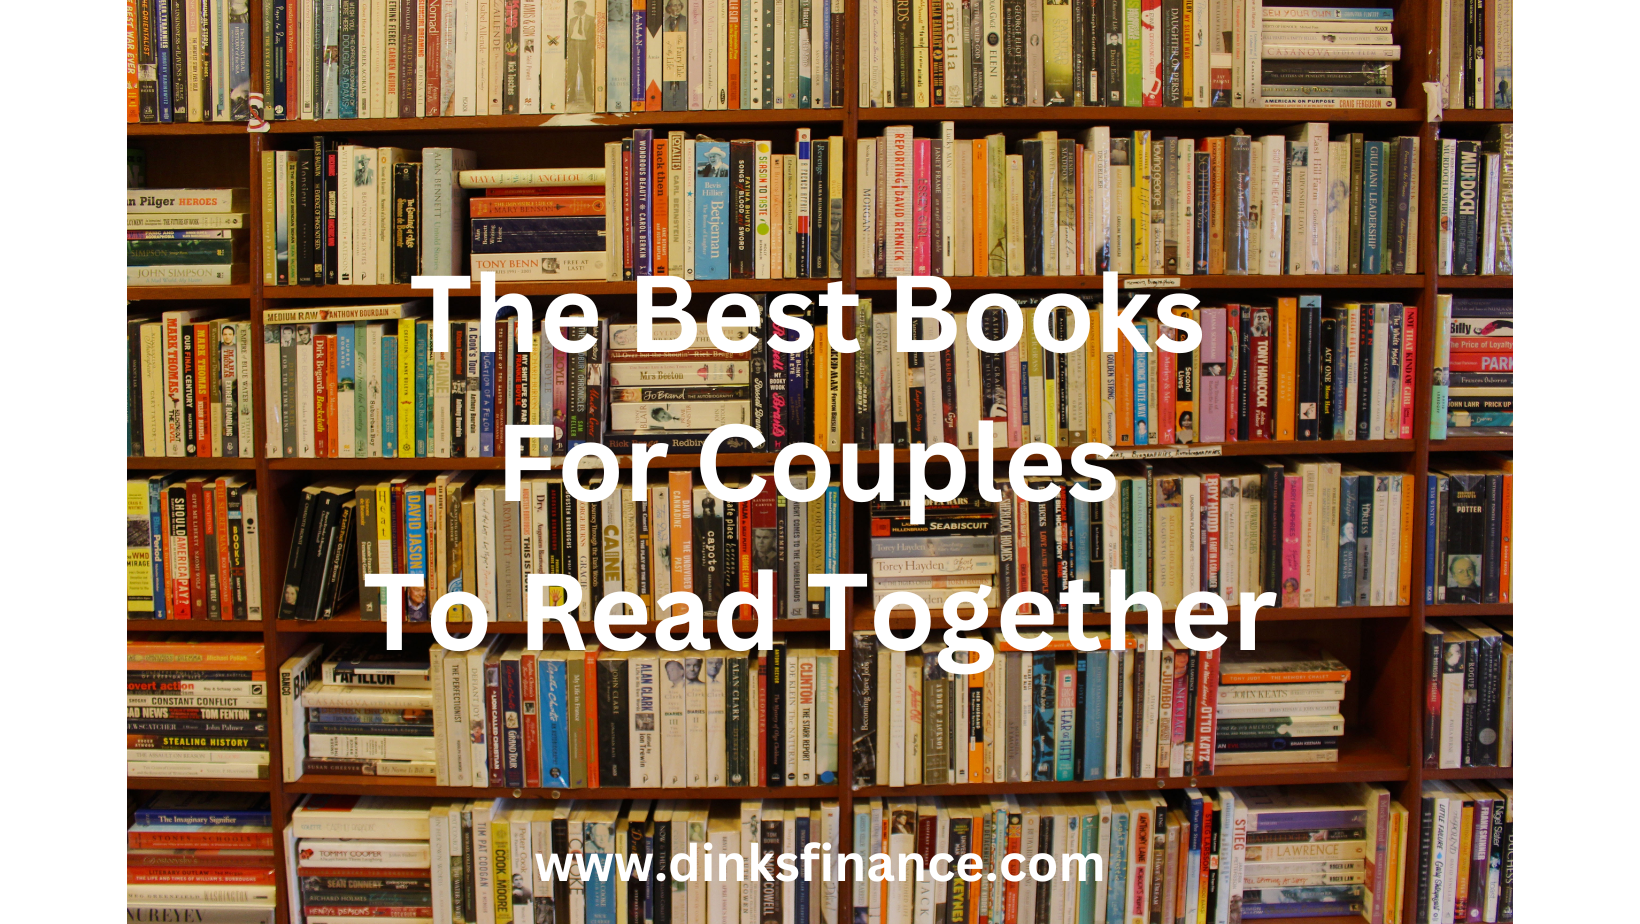 50 Books for Couples to Read Together - Everyday Reading